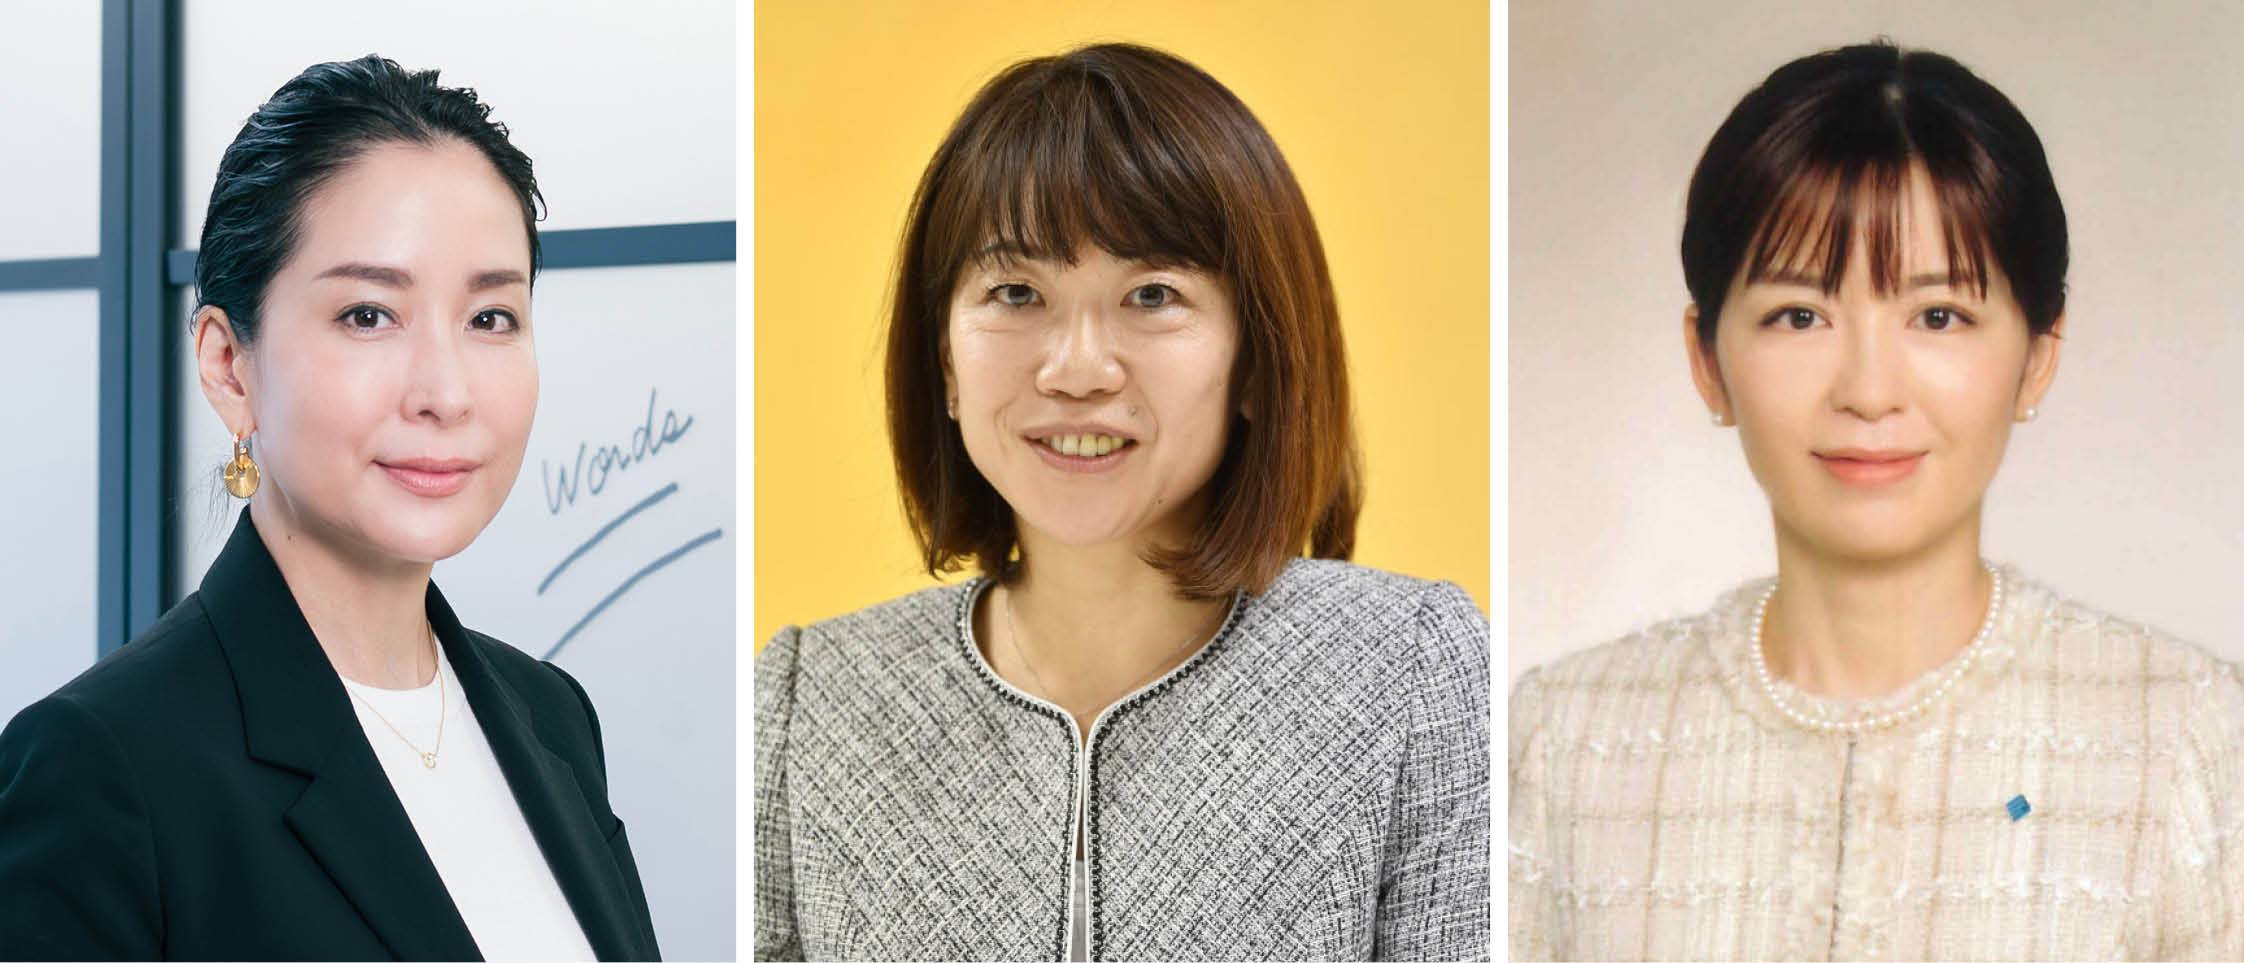 From left: Kyoko Uchida, Naoko Takahashi and Minako Nakano are among the celebrities Japanese companies are tapping to increase the number of female executives. | KIDS SMILE HOLDINGS